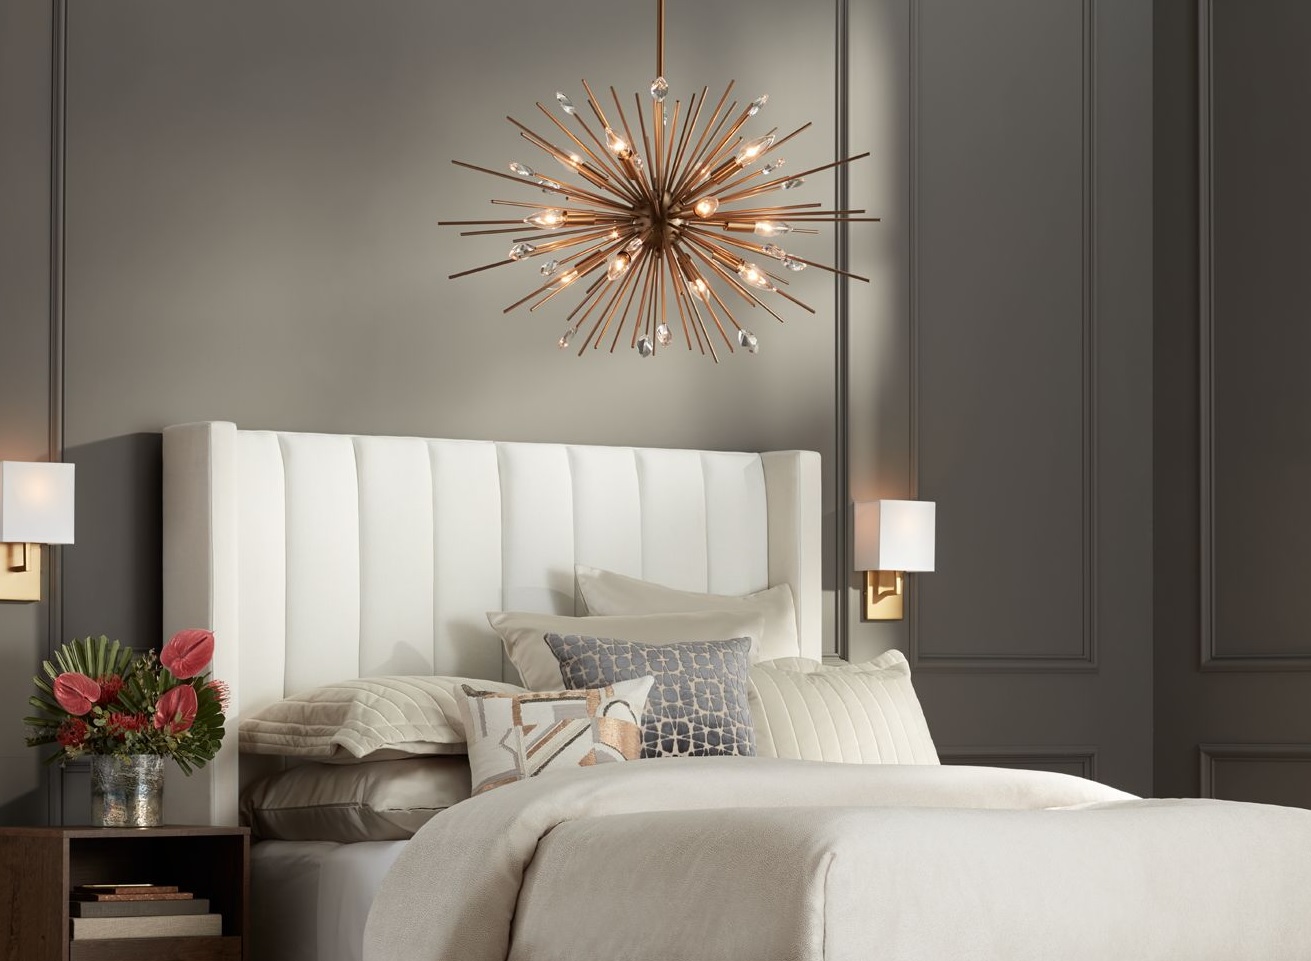 Should bedrooms have ceiling lights A mood-ruiner or an essential fixture – experts discuss